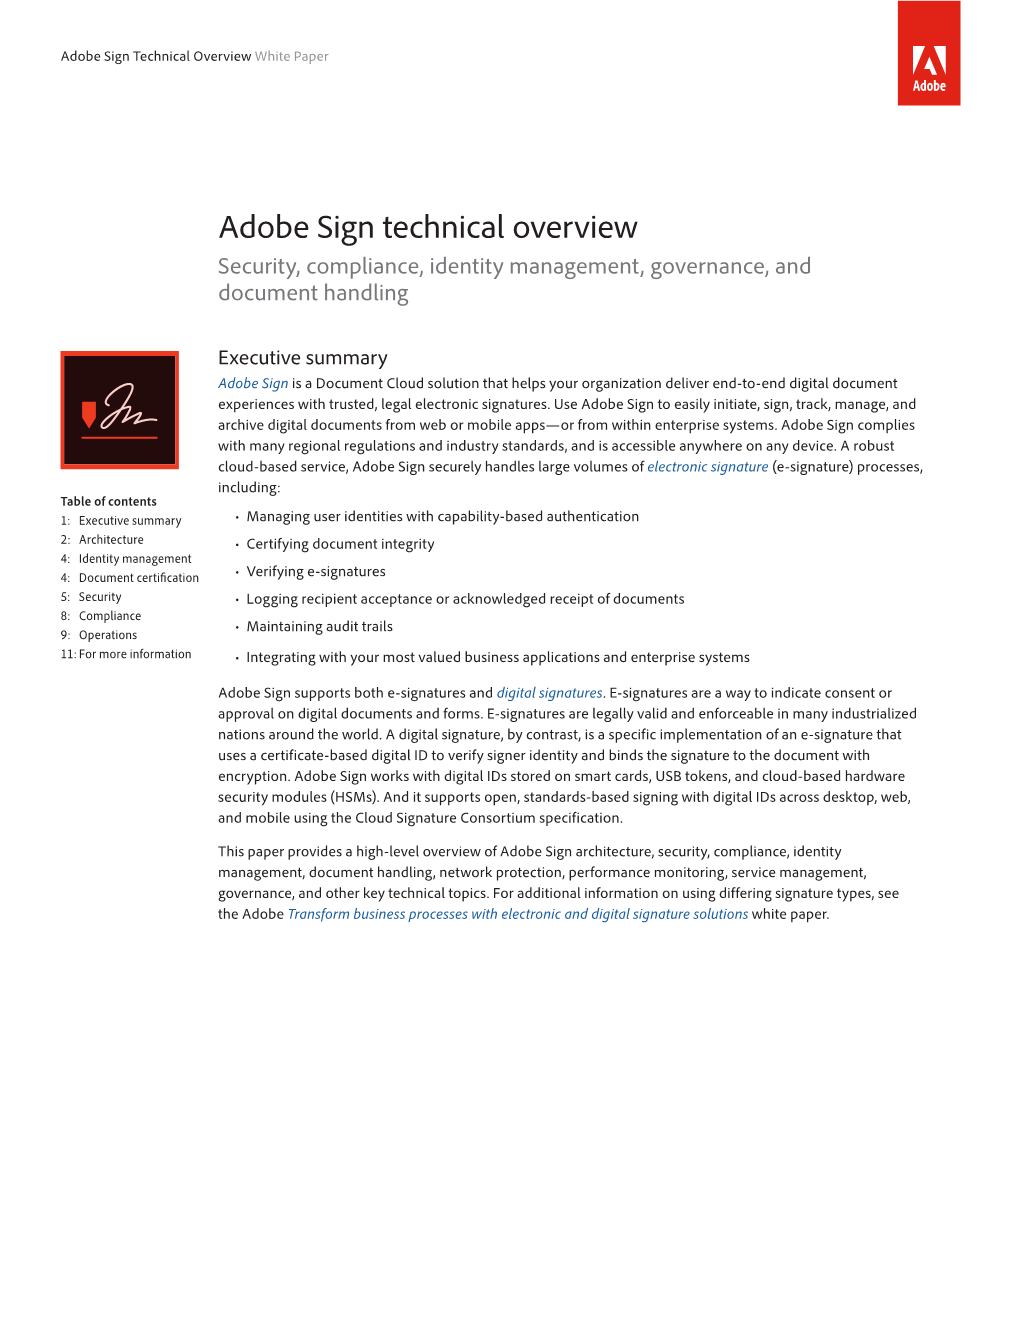 Adobe Sign Technical Overview White Paper